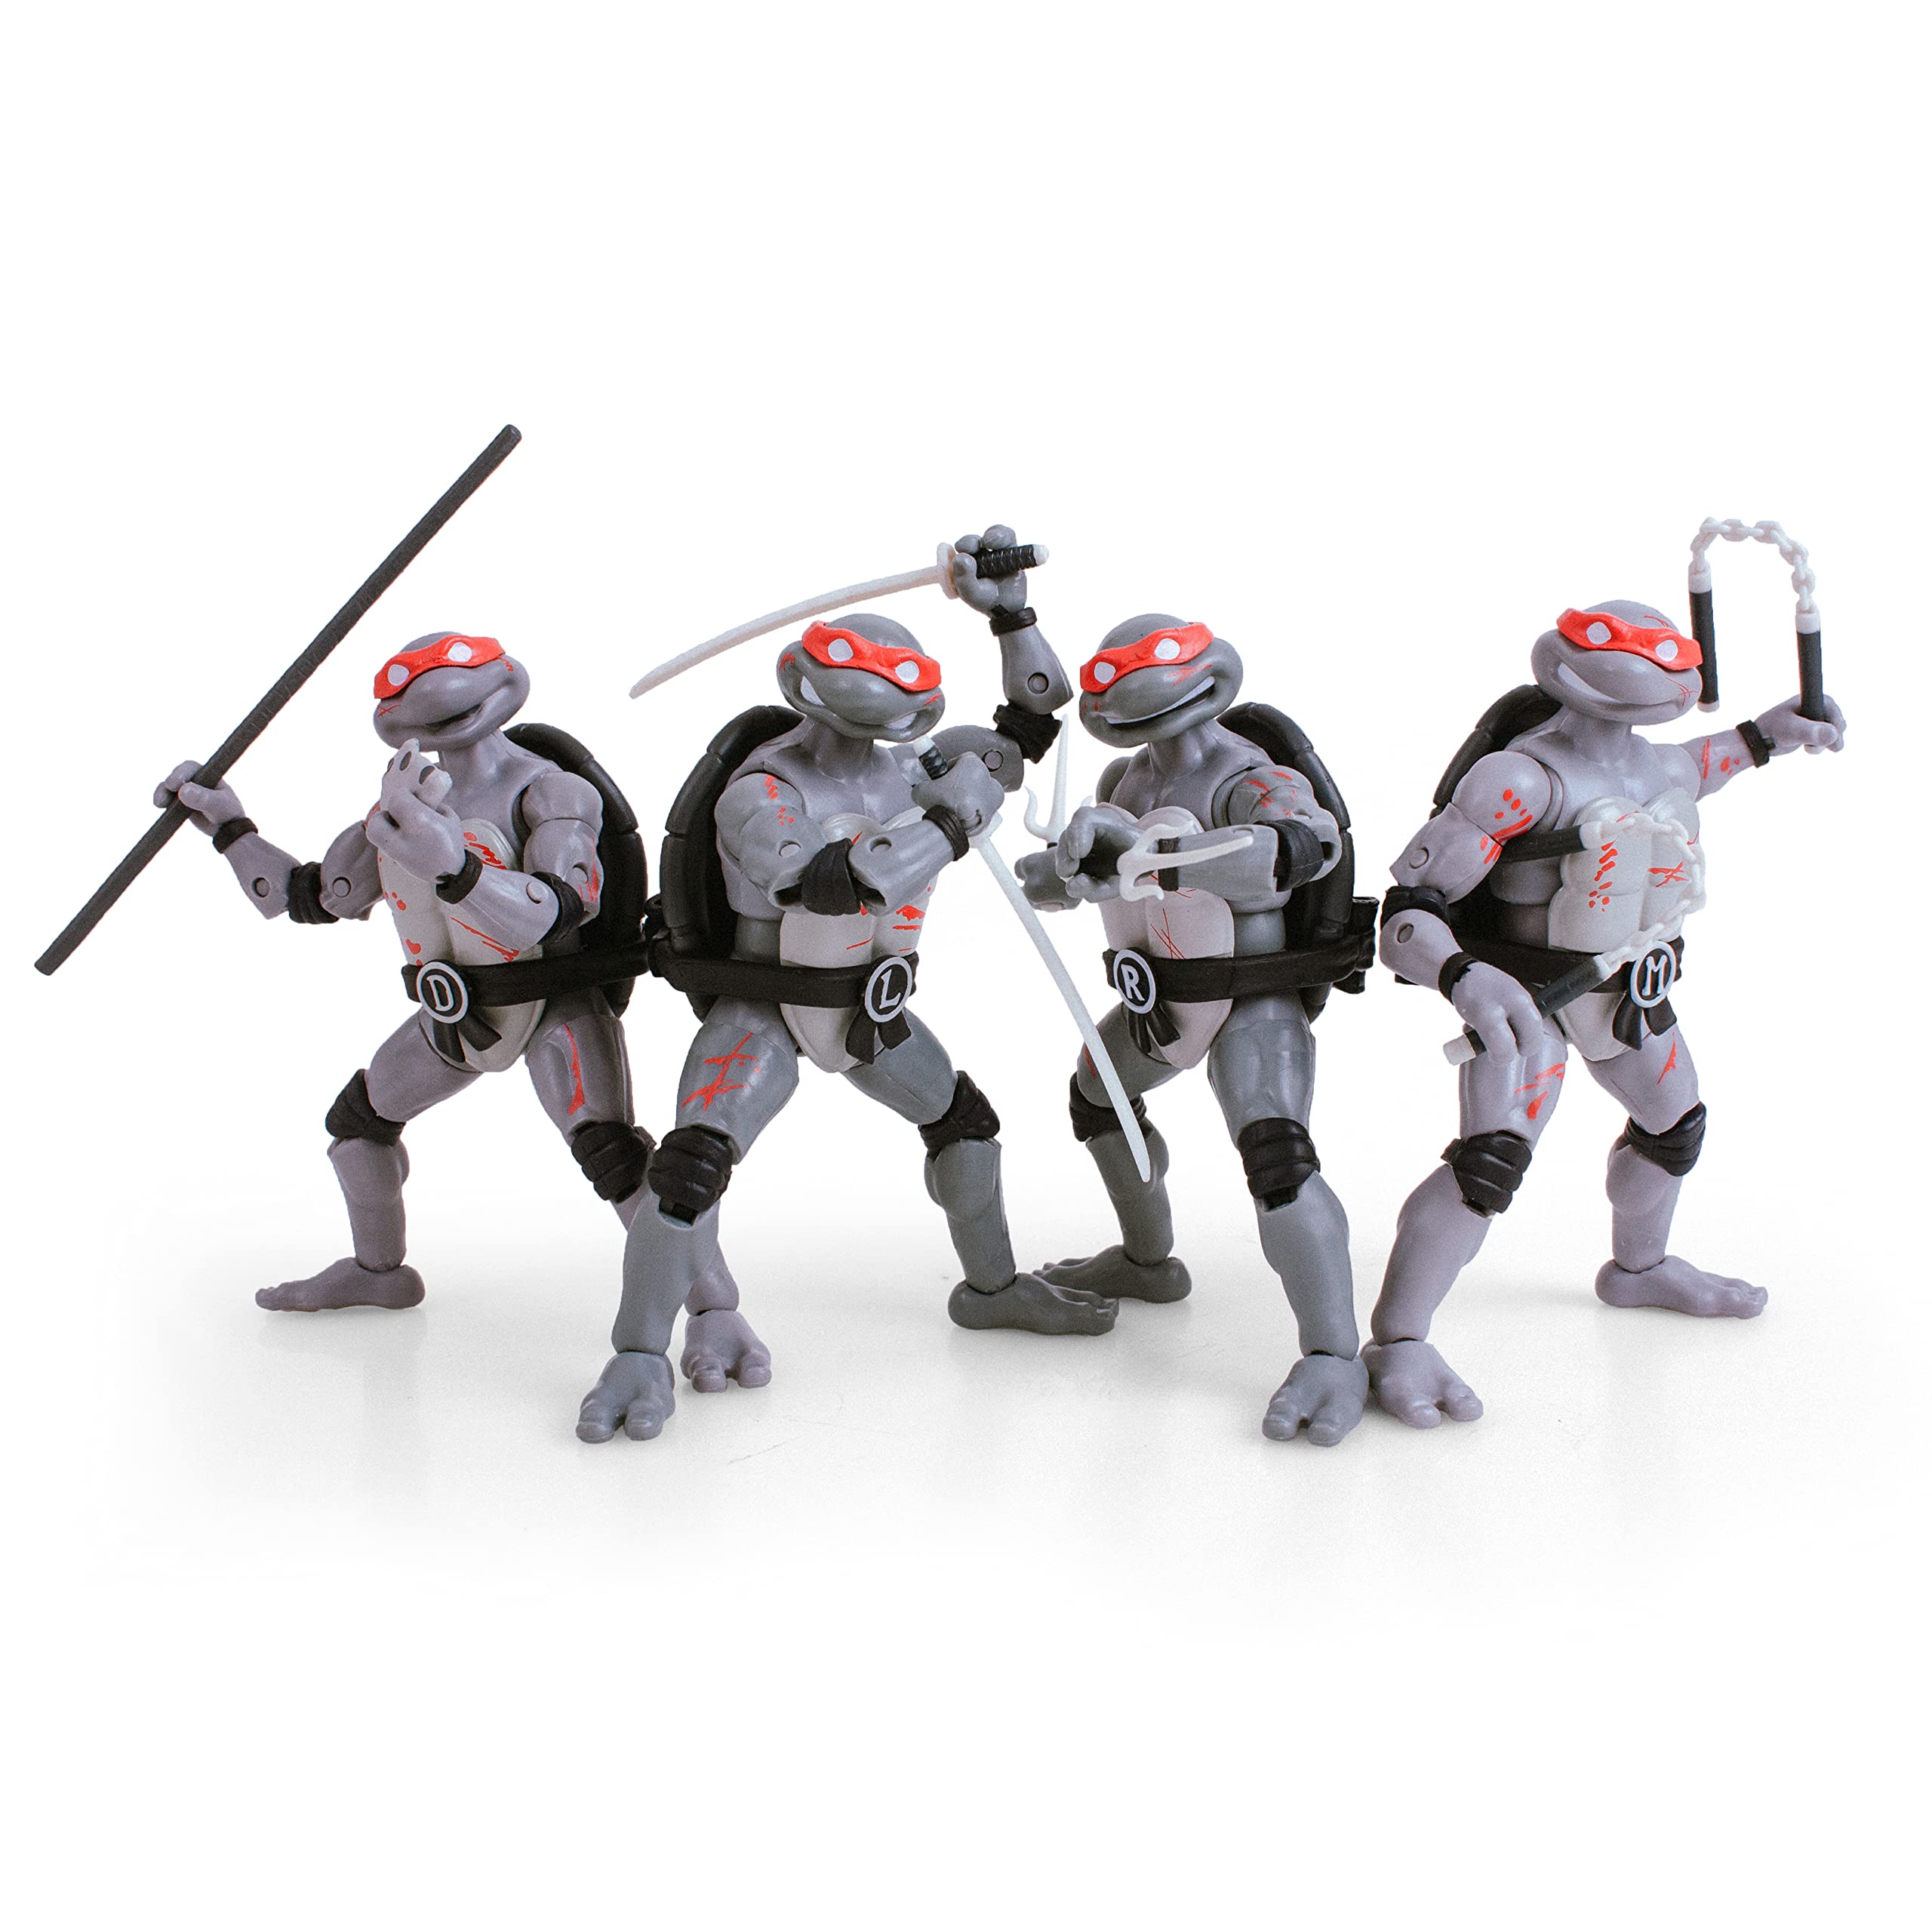 The Loyal Subjects TMNT Battle Damaged Comic Line Art 4-Pack BST AXN 5 Action Figure Set 送料無料